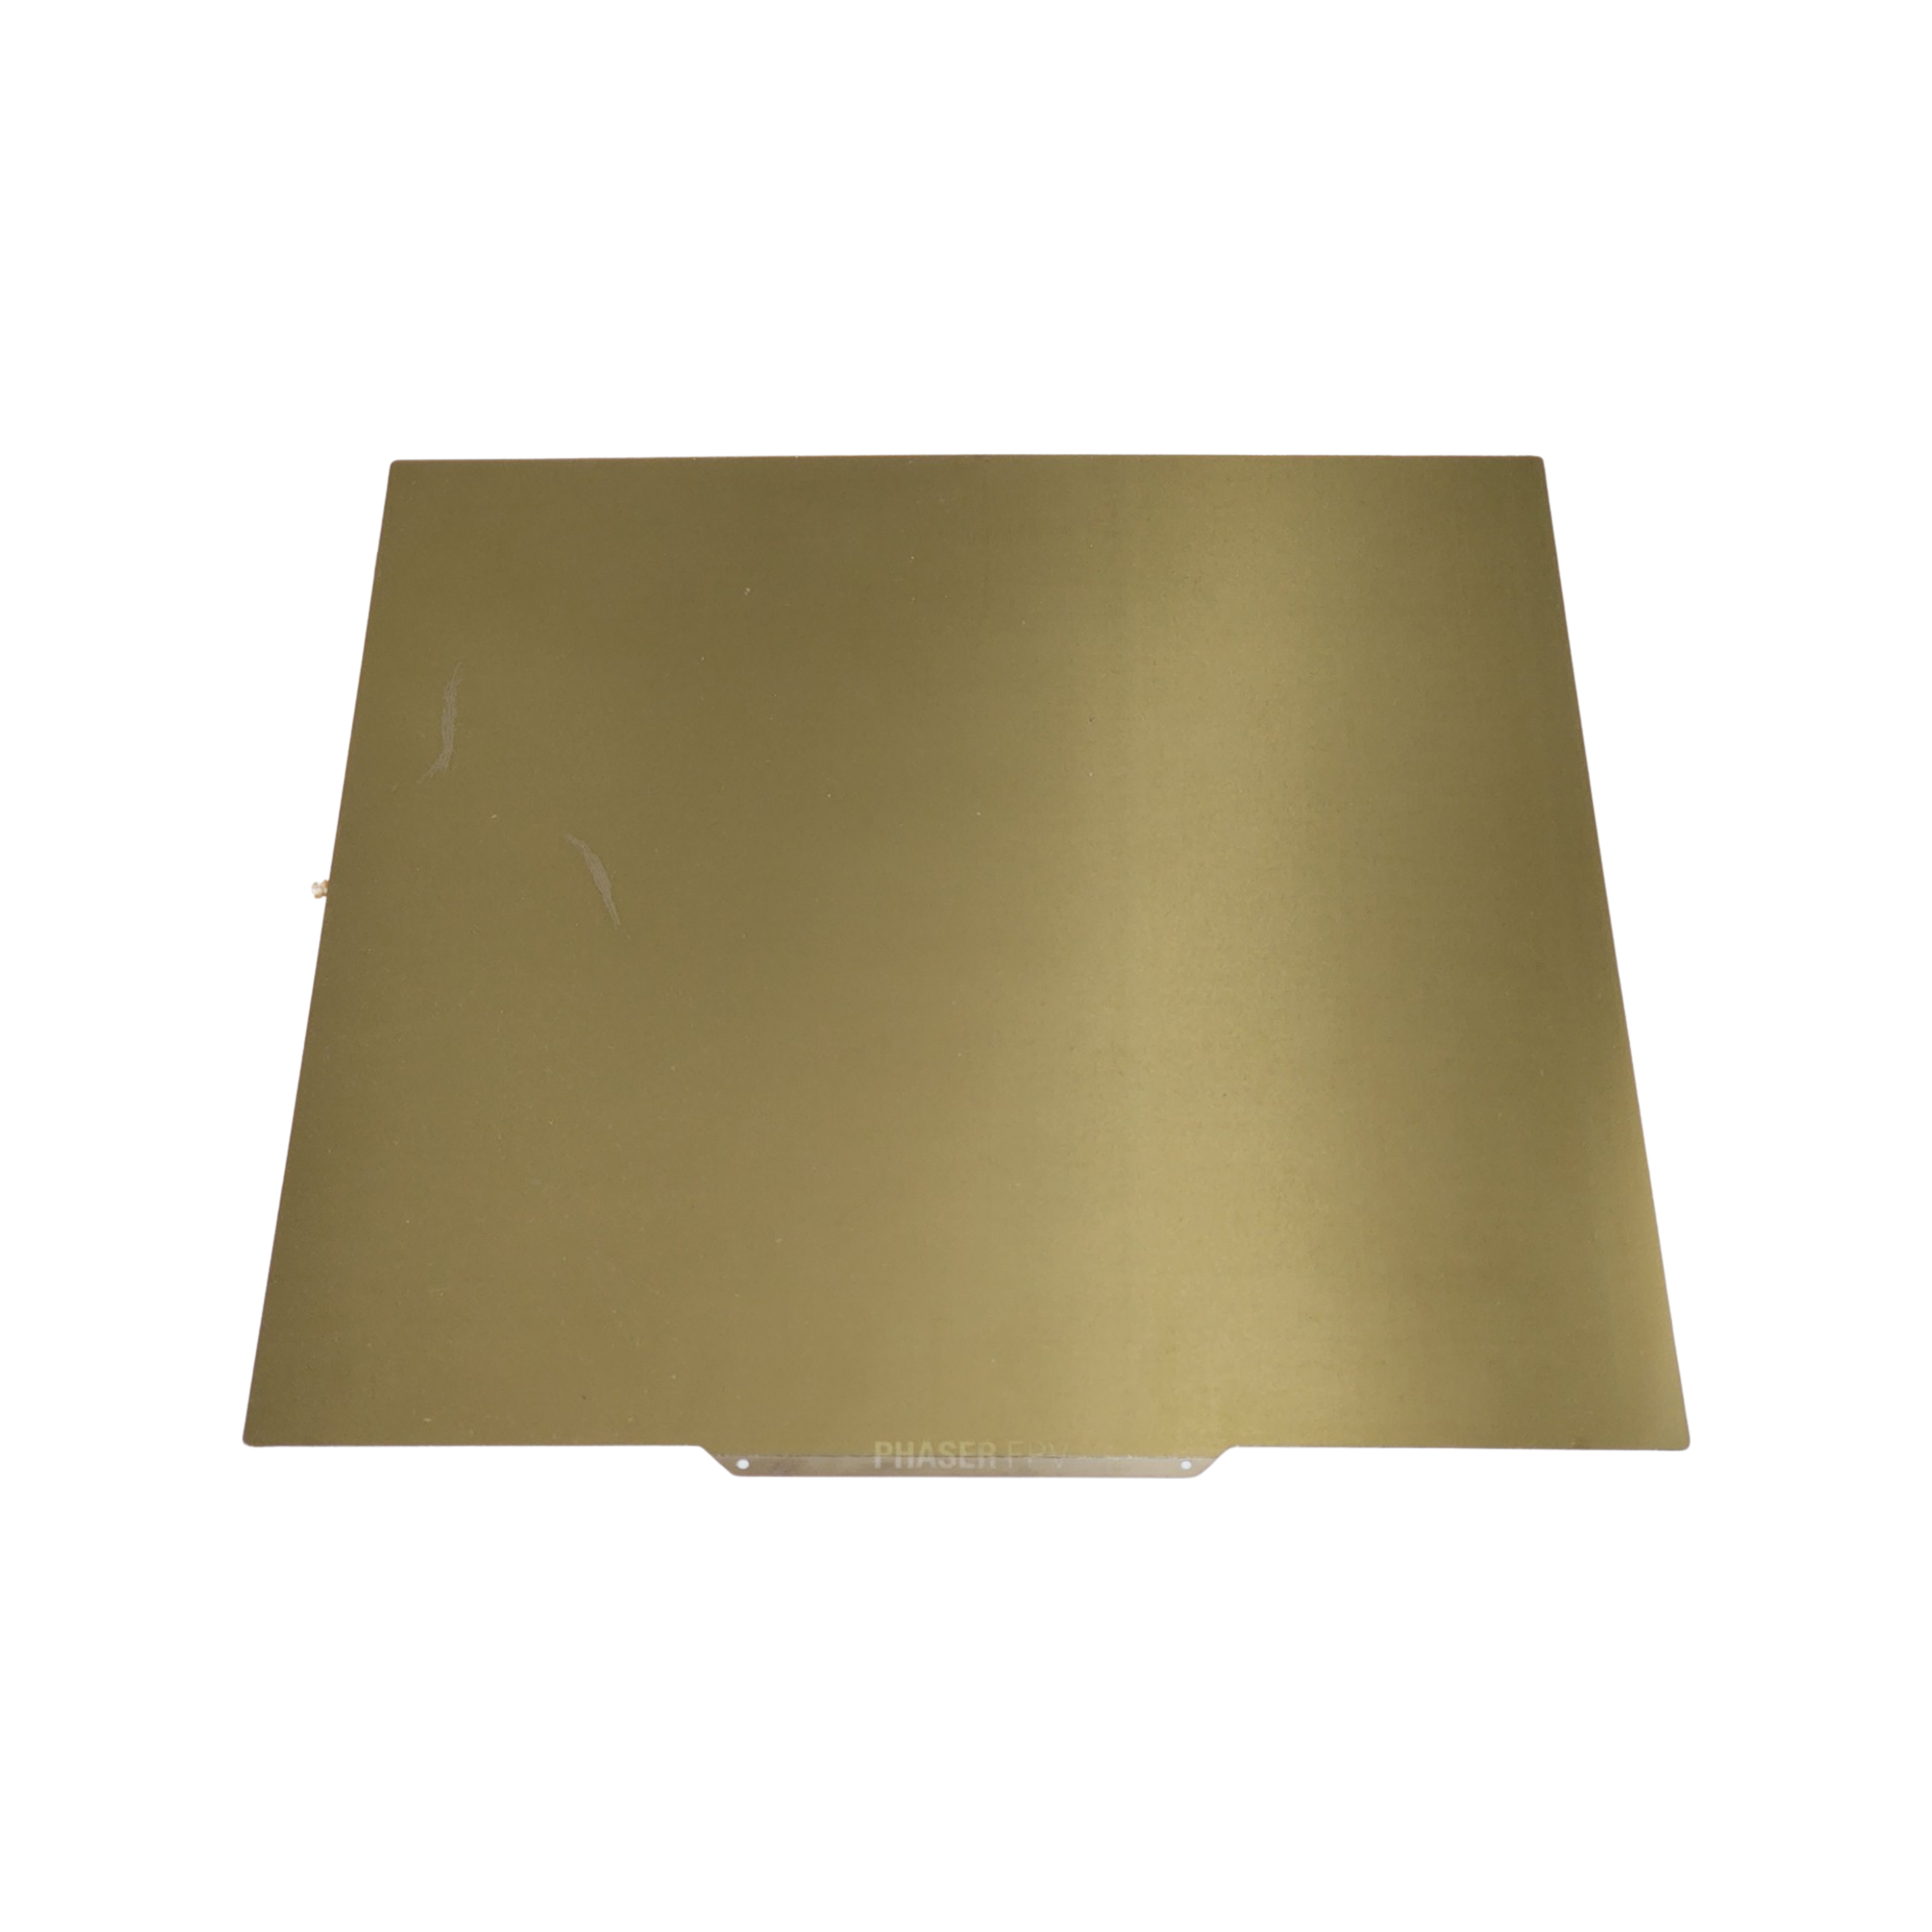 Energetic 410x410mm DOUBLE SIDED Smooth PEI/Textured Gold Spring Steel Sheet (Suits Ratrig)